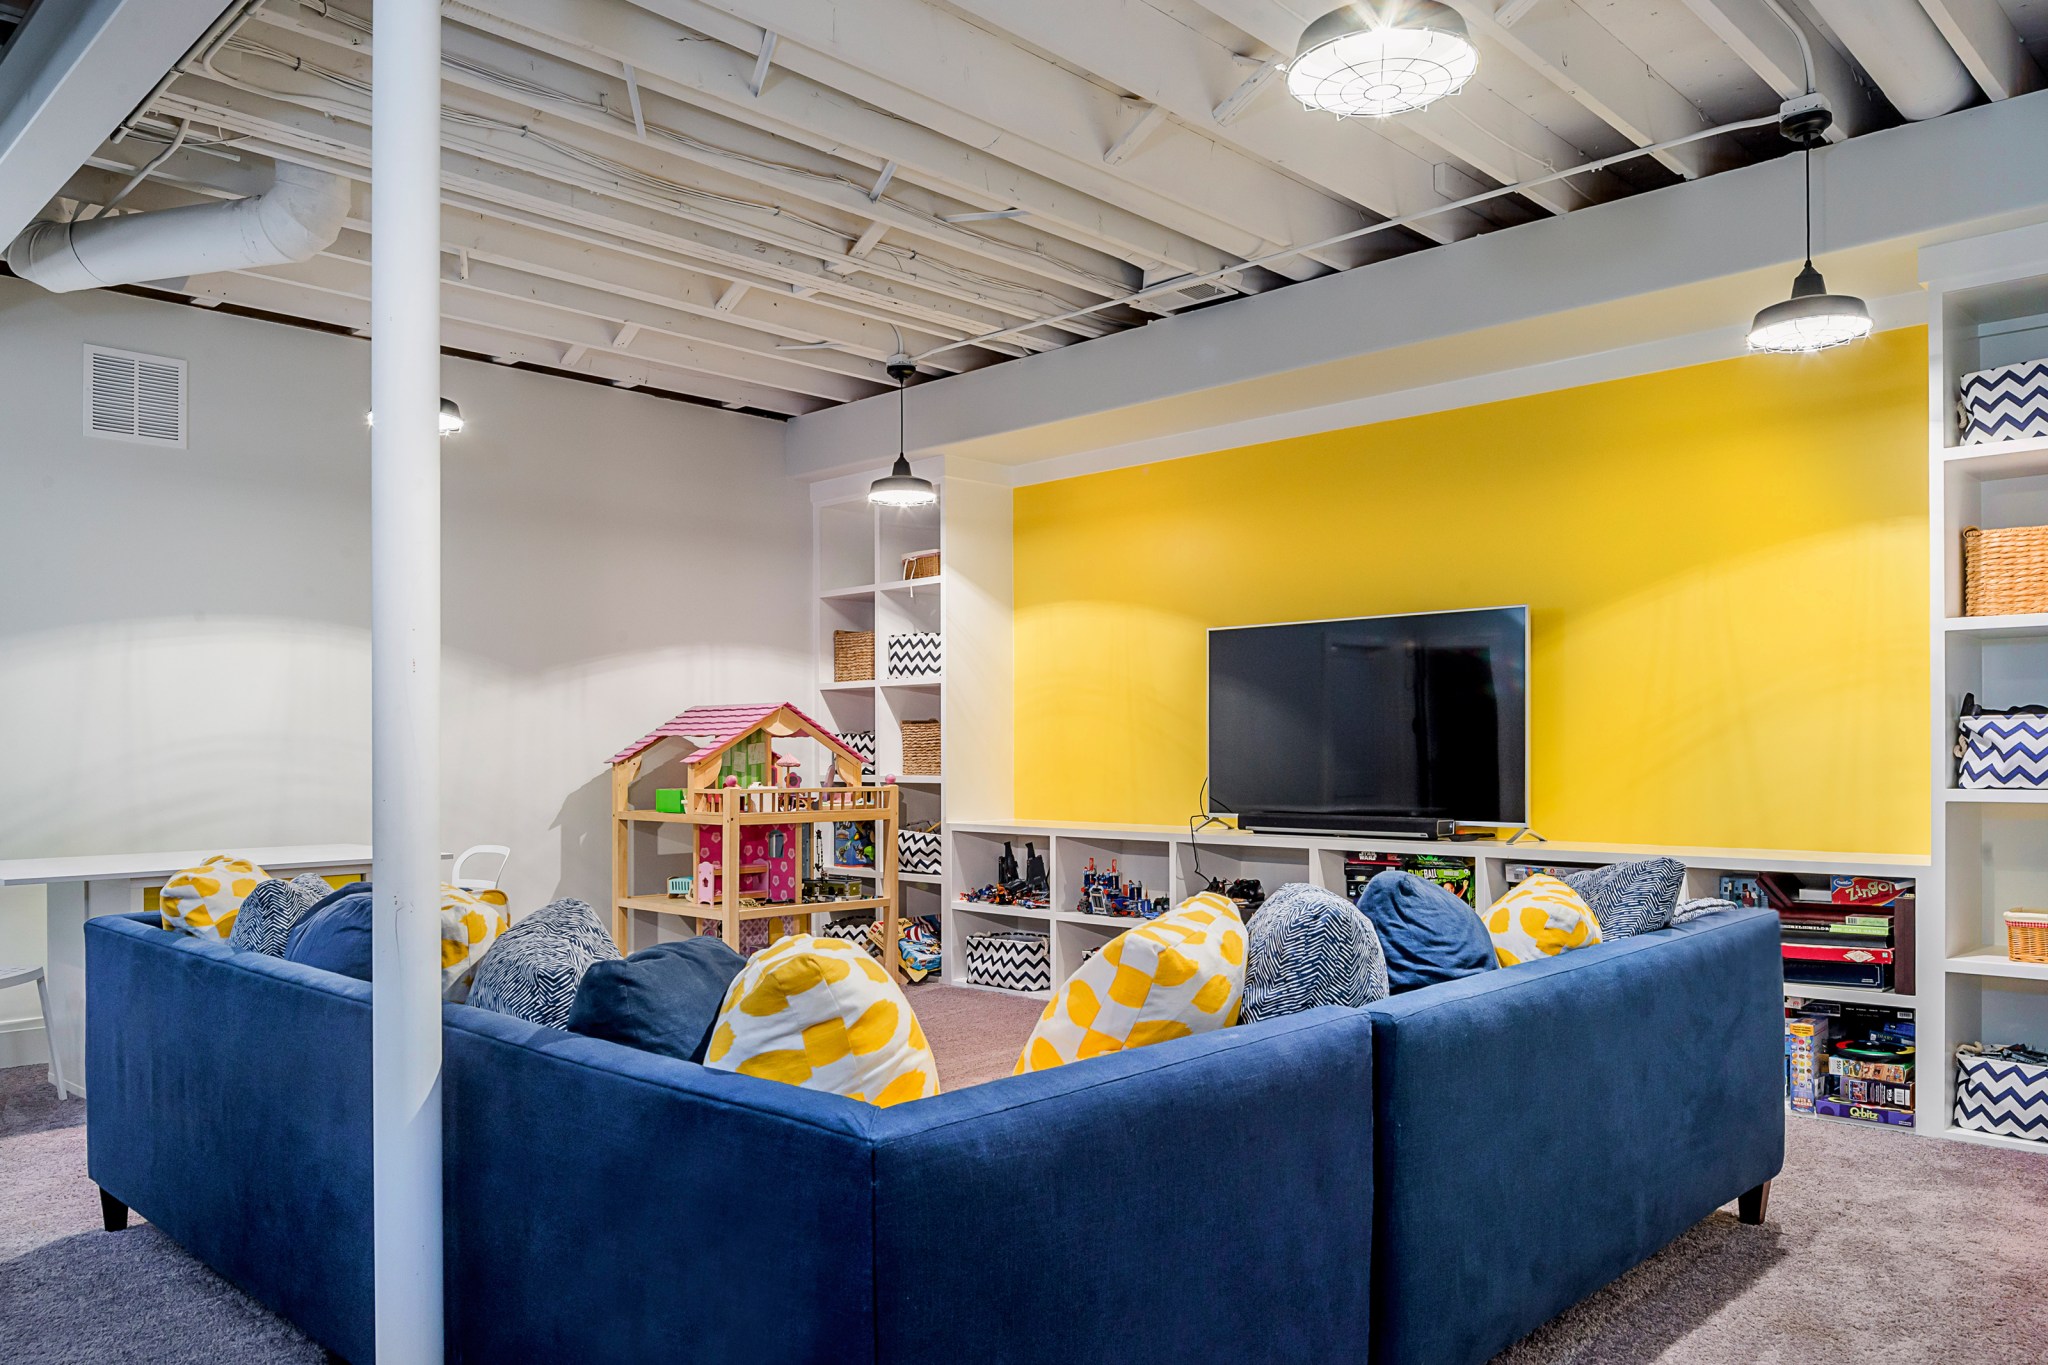 Blue and yellow basement with built-in shelves, open ceiling